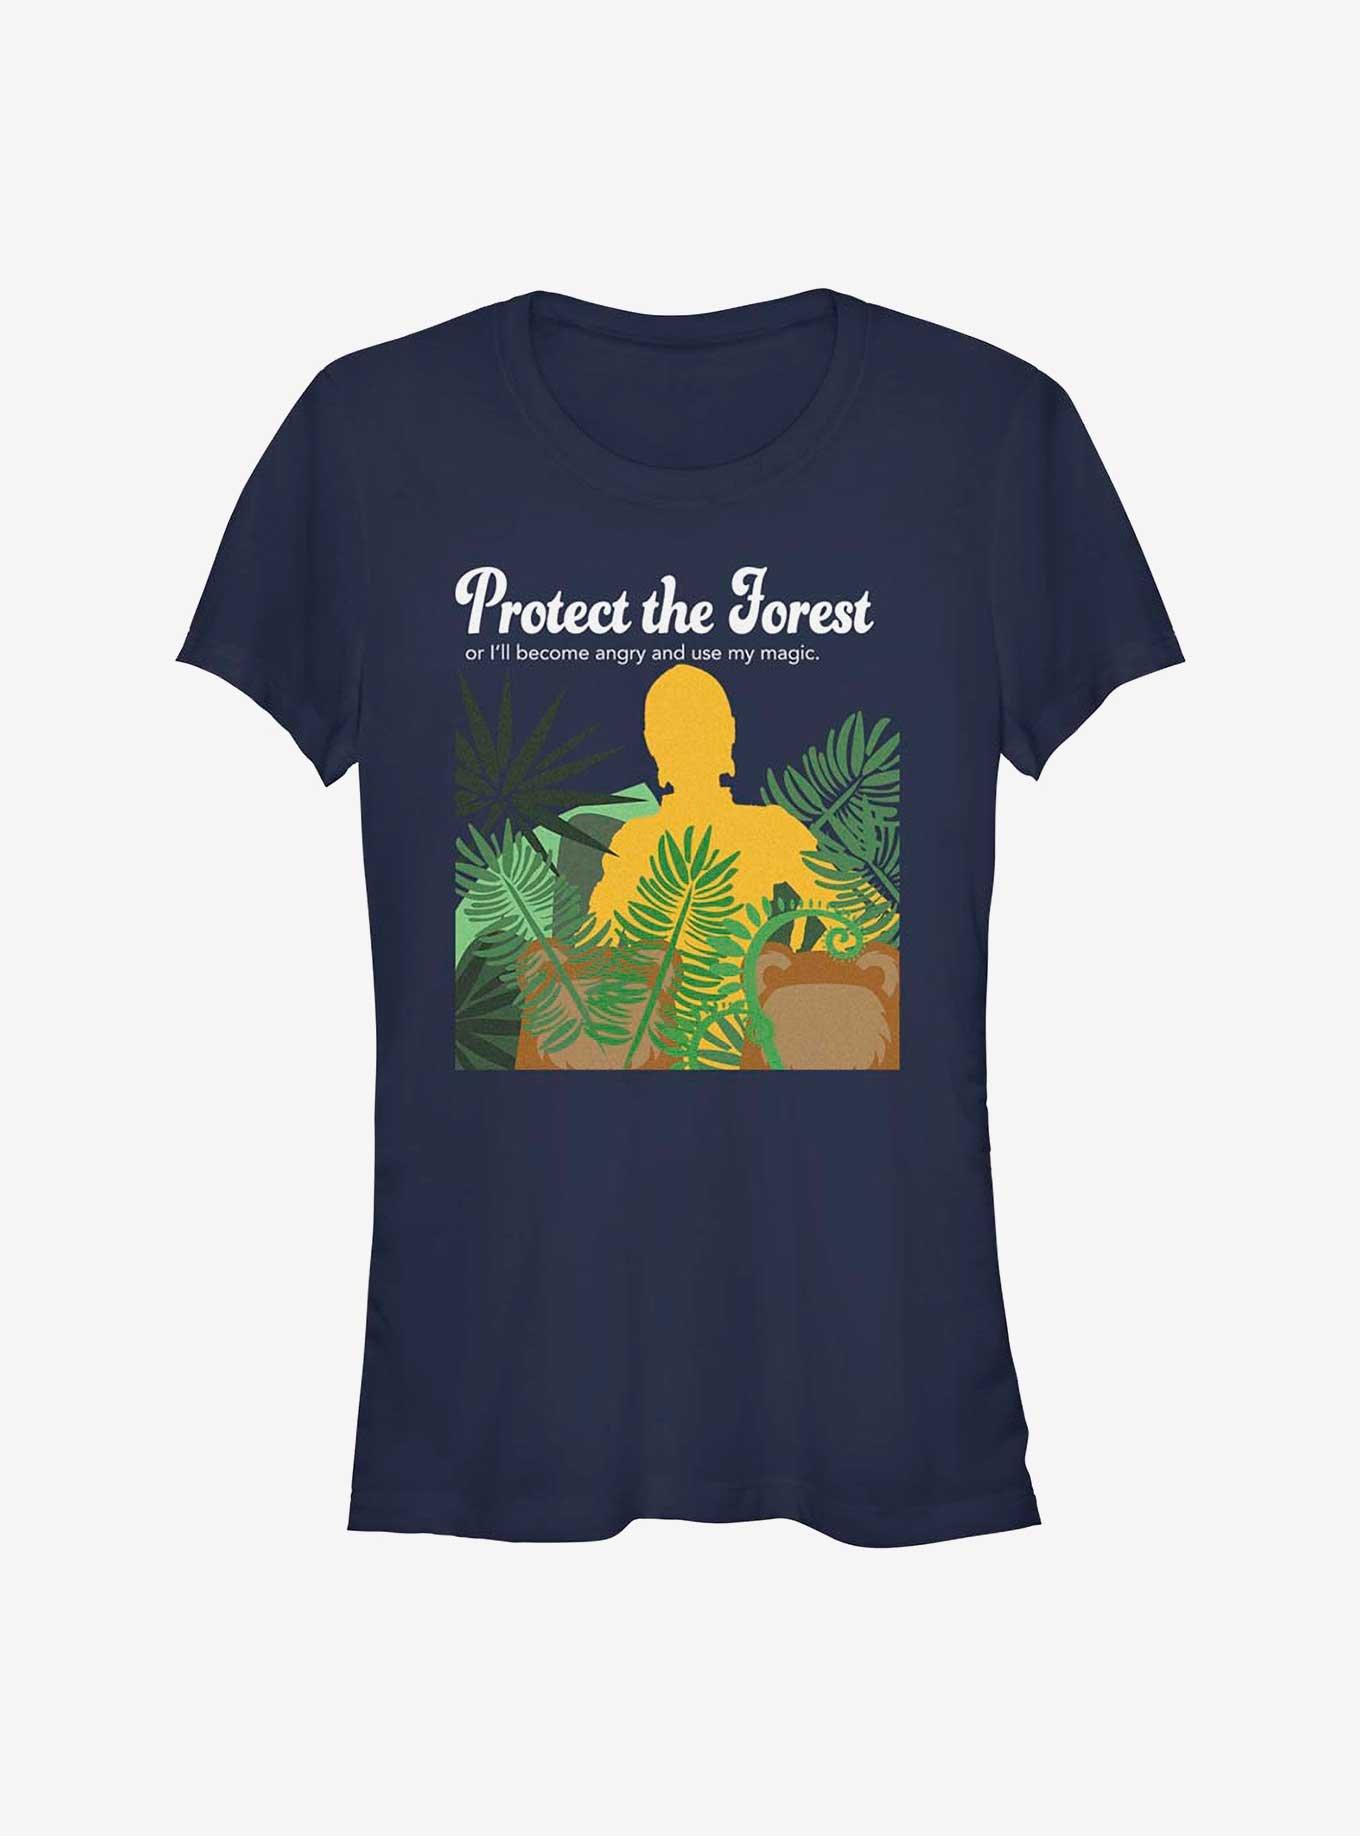 Star Wars Earth Day C-3PO Protect Or Else Girls T-Shirt, NAVY, hi-res